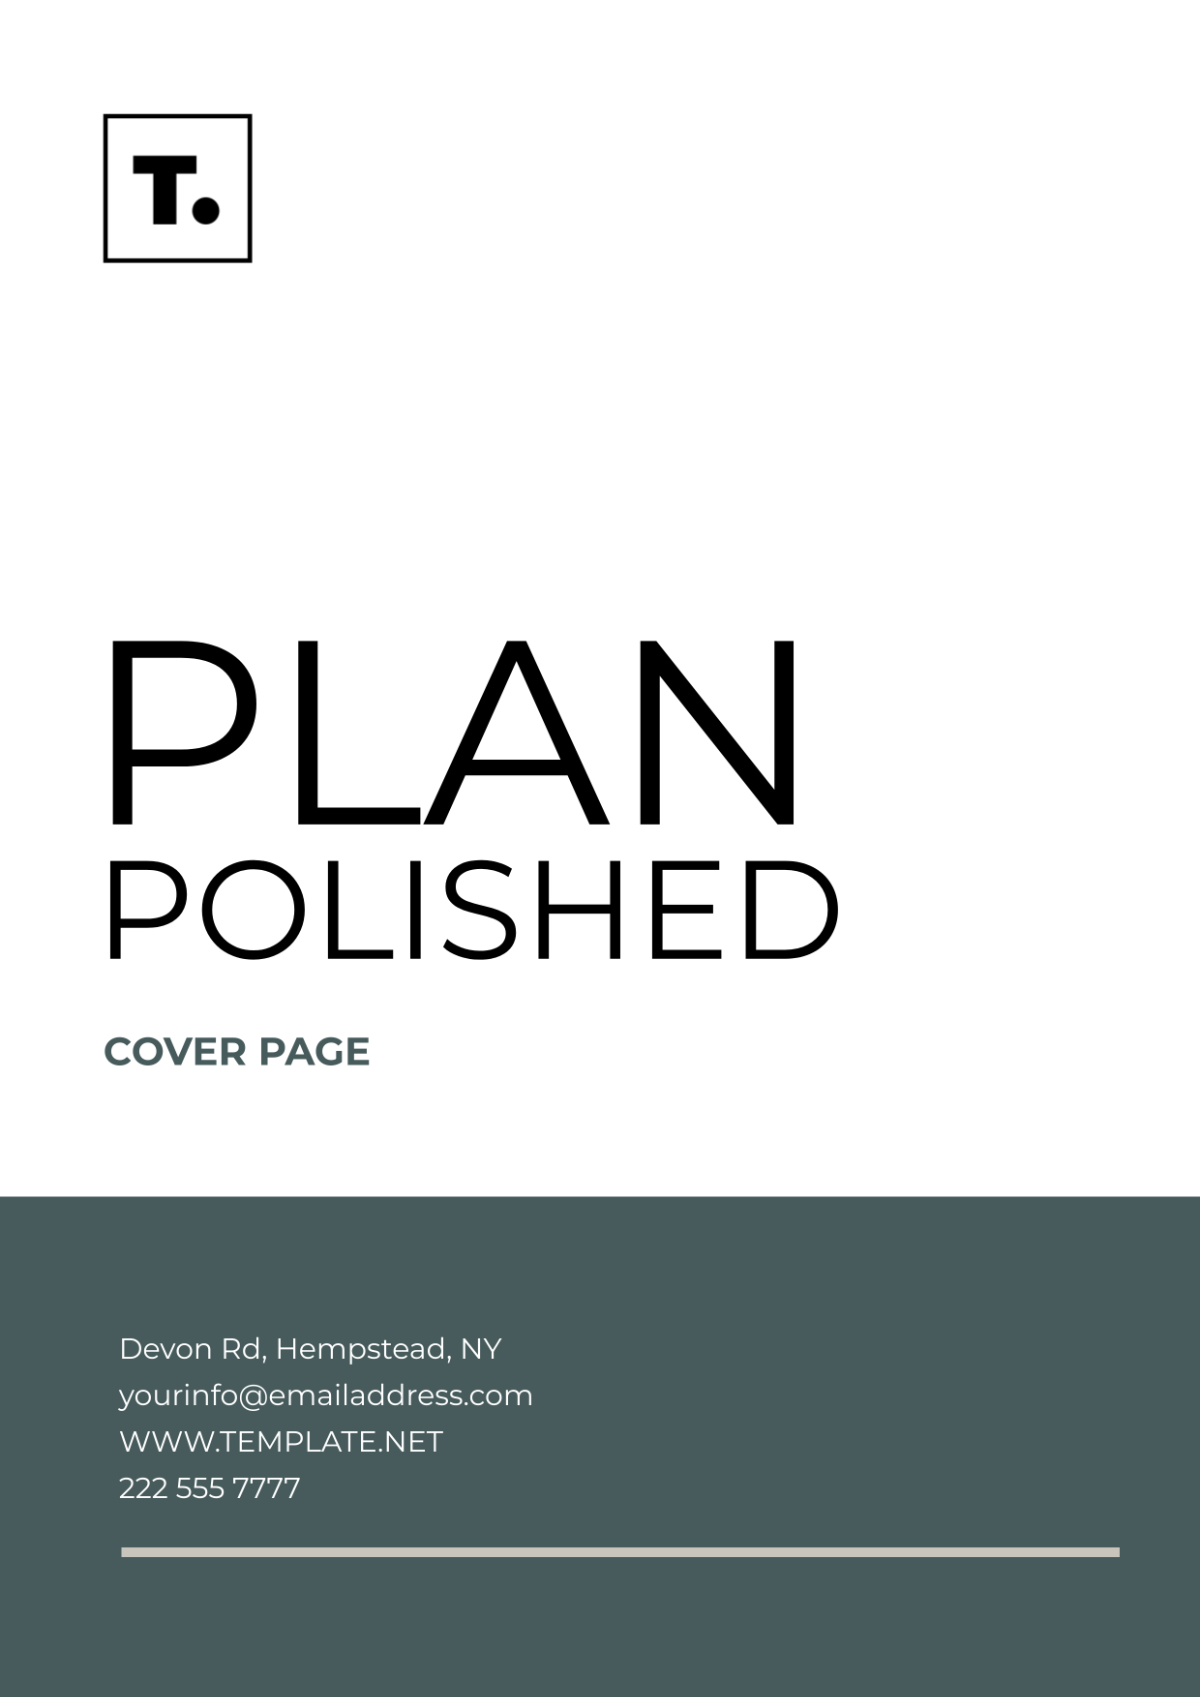 Plan Polished Cover Page